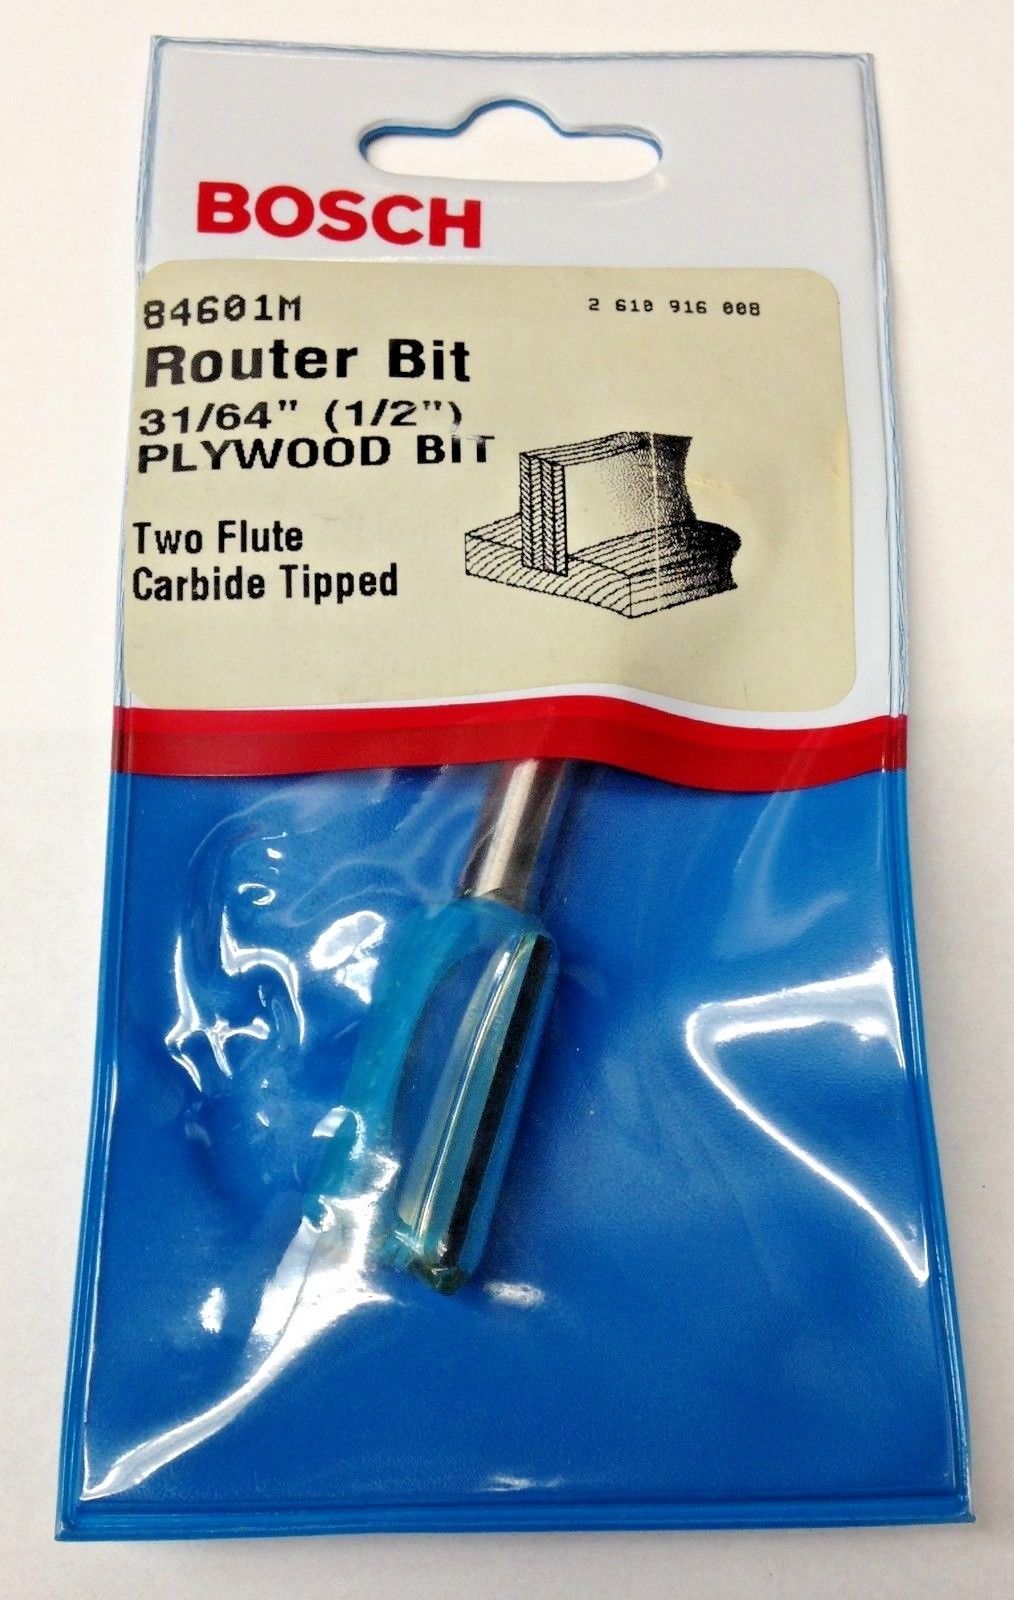 Bosch 84601M 31/64" (1/2") Two Flute Carbide Tipped Plywood Router Bit USA